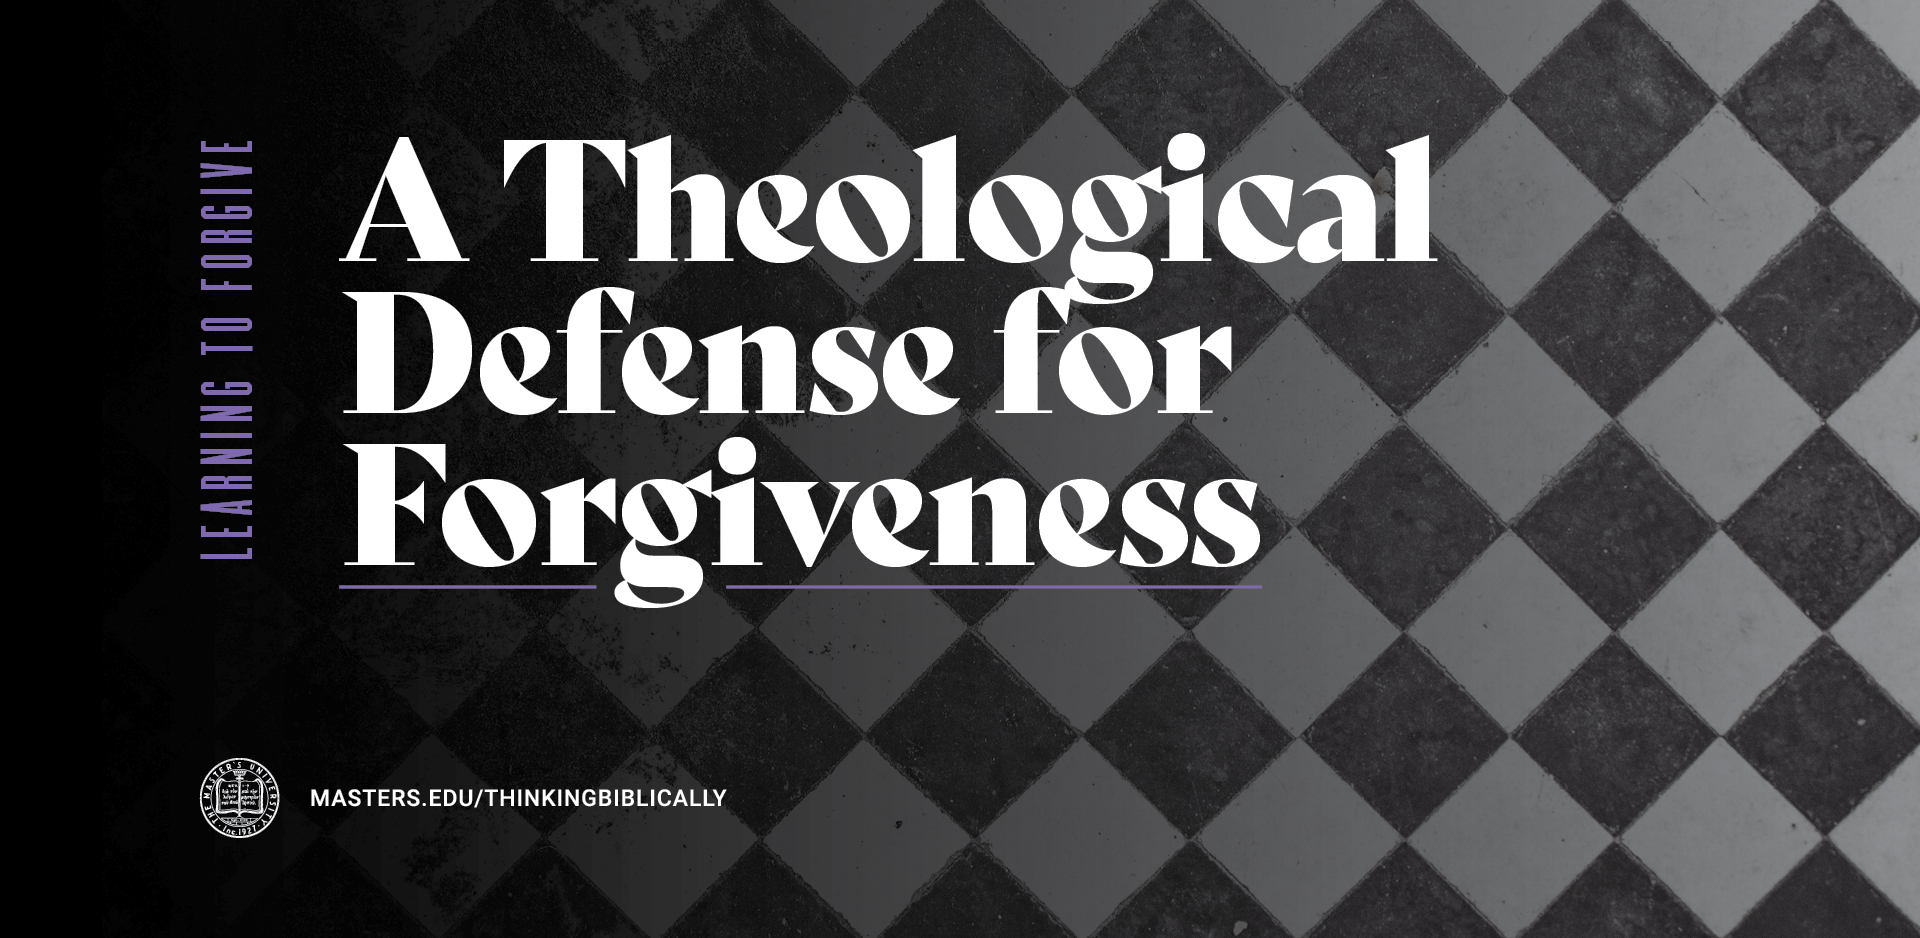 A Theological Defense for Forgiveness Featured Image